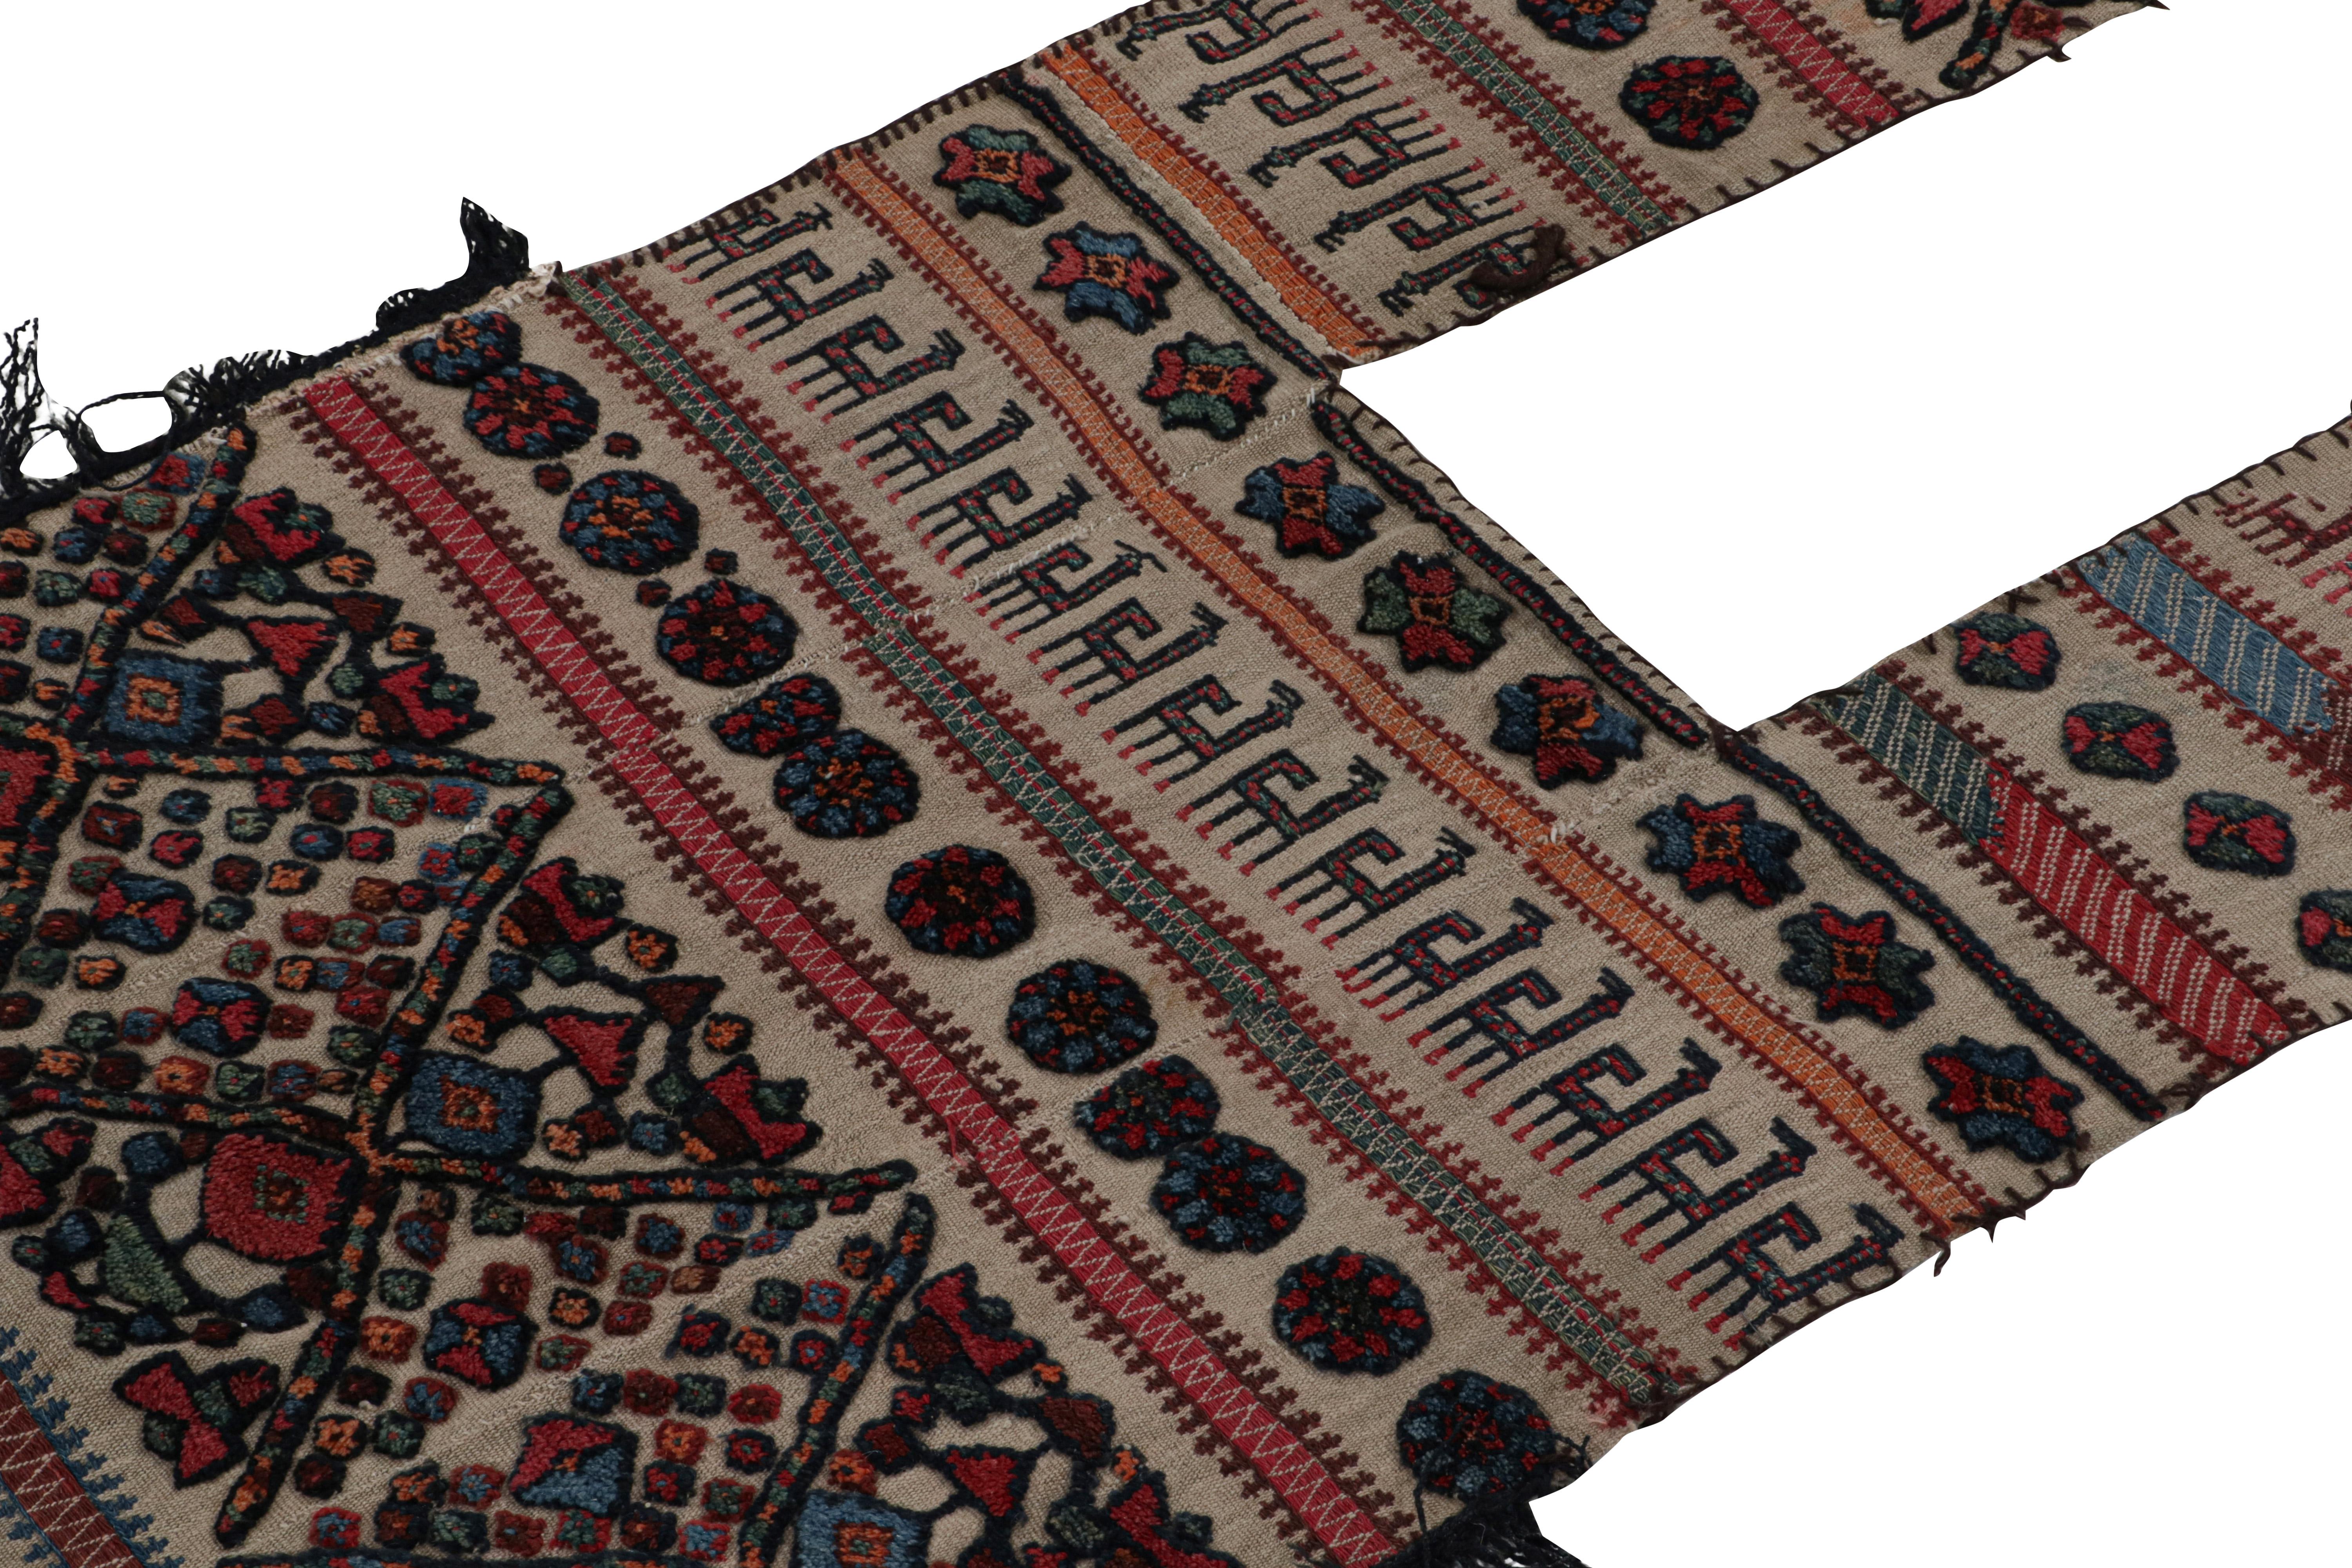 Hand-Woven Antique Persian Horse Cover with Colorful Geometric Patterns, from Rug & Kilim For Sale